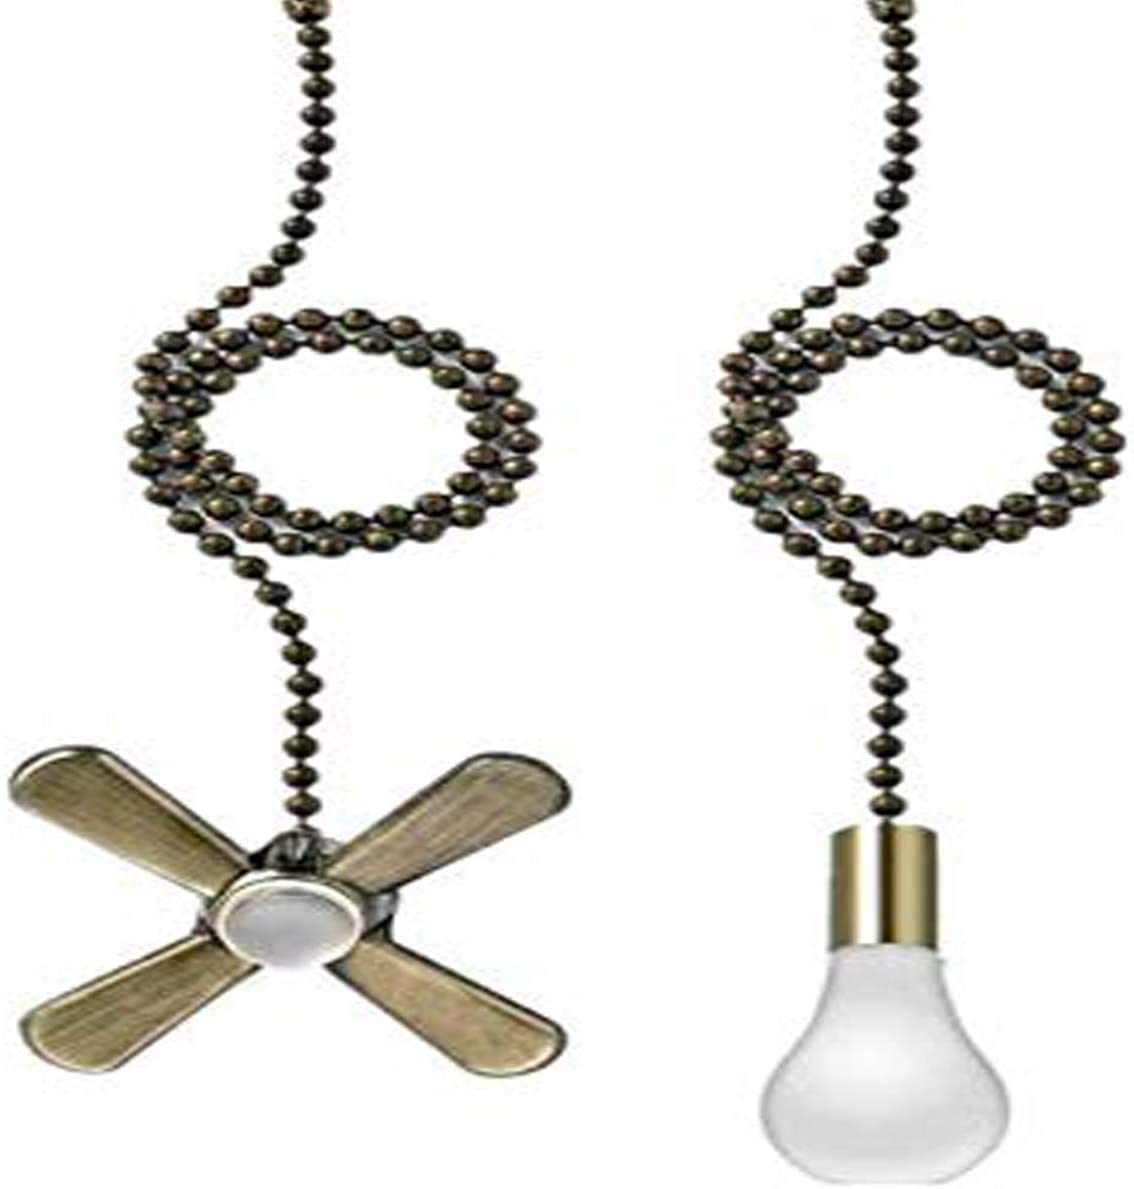 Ceiling Fan Pull Chain Ornaments - 13.6 Inches Fan Pull with Ball Chain Connector Included Light & fan Pulls(black)